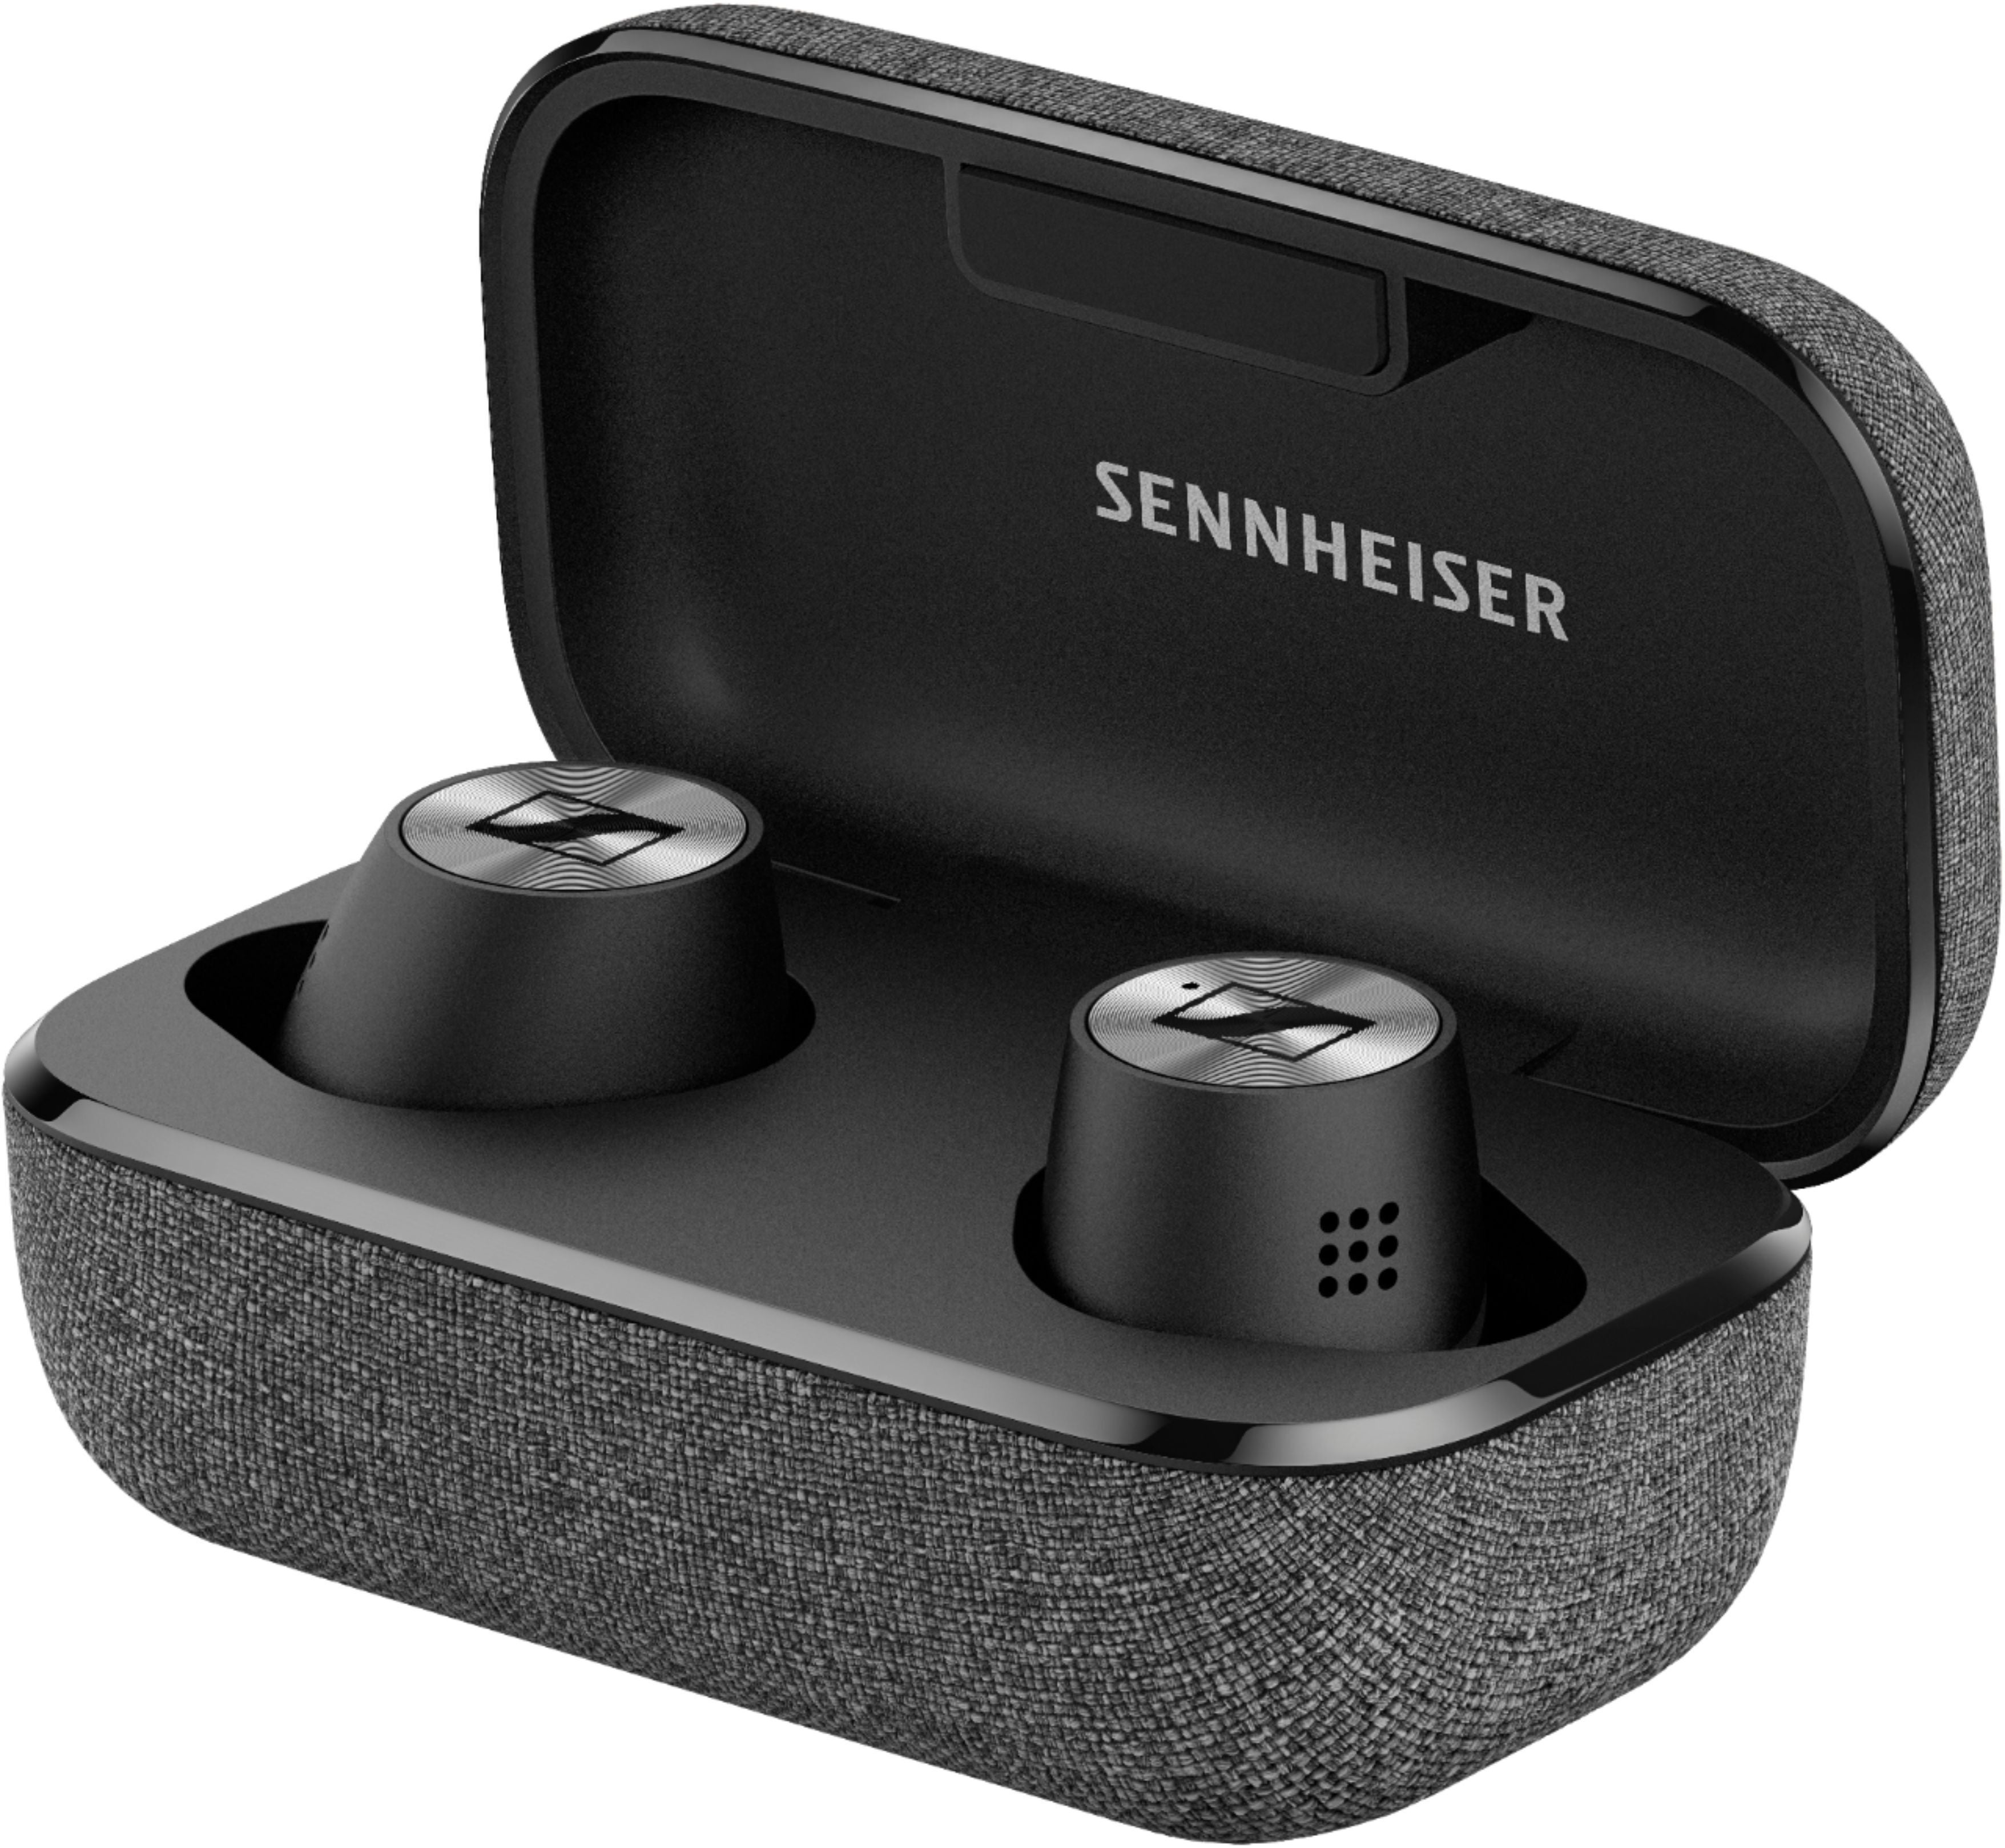 Get a pair of noise-canceling Sennheiser earbuds with $100 off right now!